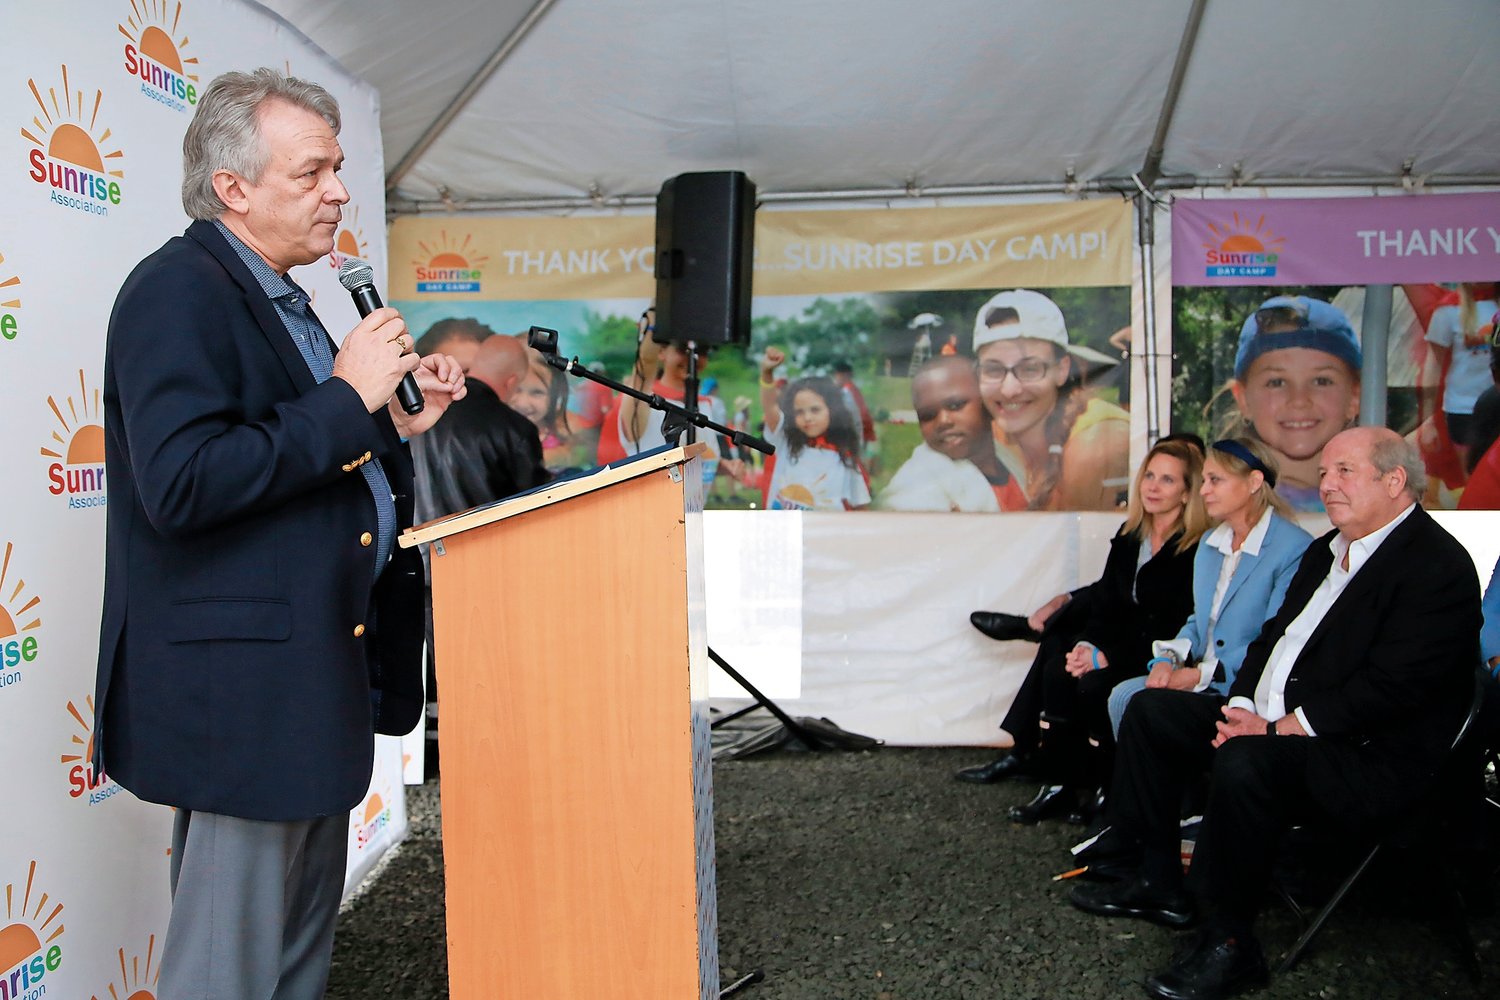 Arnie Preminger, the Sunrise Association’s founder, president and CEO, welcomed attendees to the groundbreaking of its headquarters.